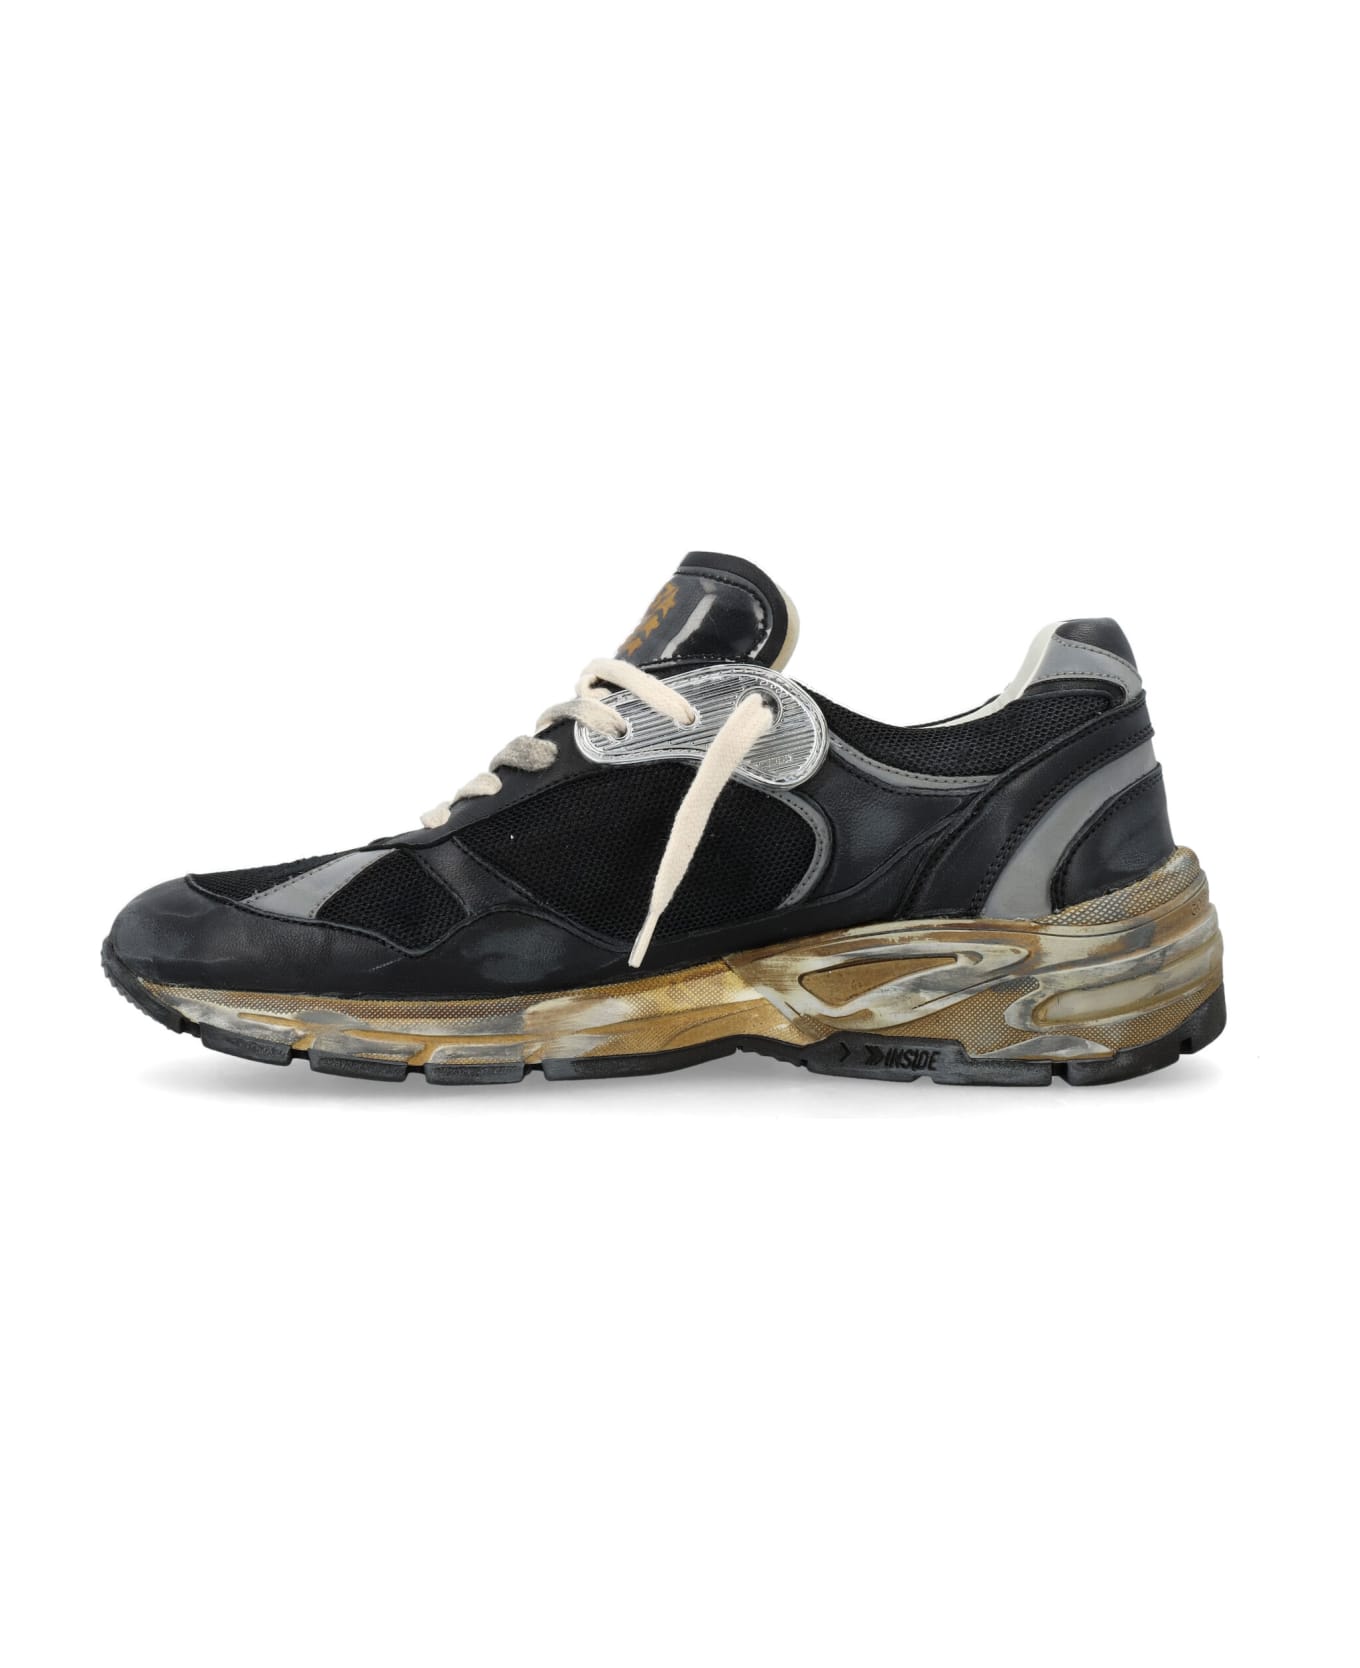 Golden Goose Dad-star Sneakers - Black/Silver/Ice